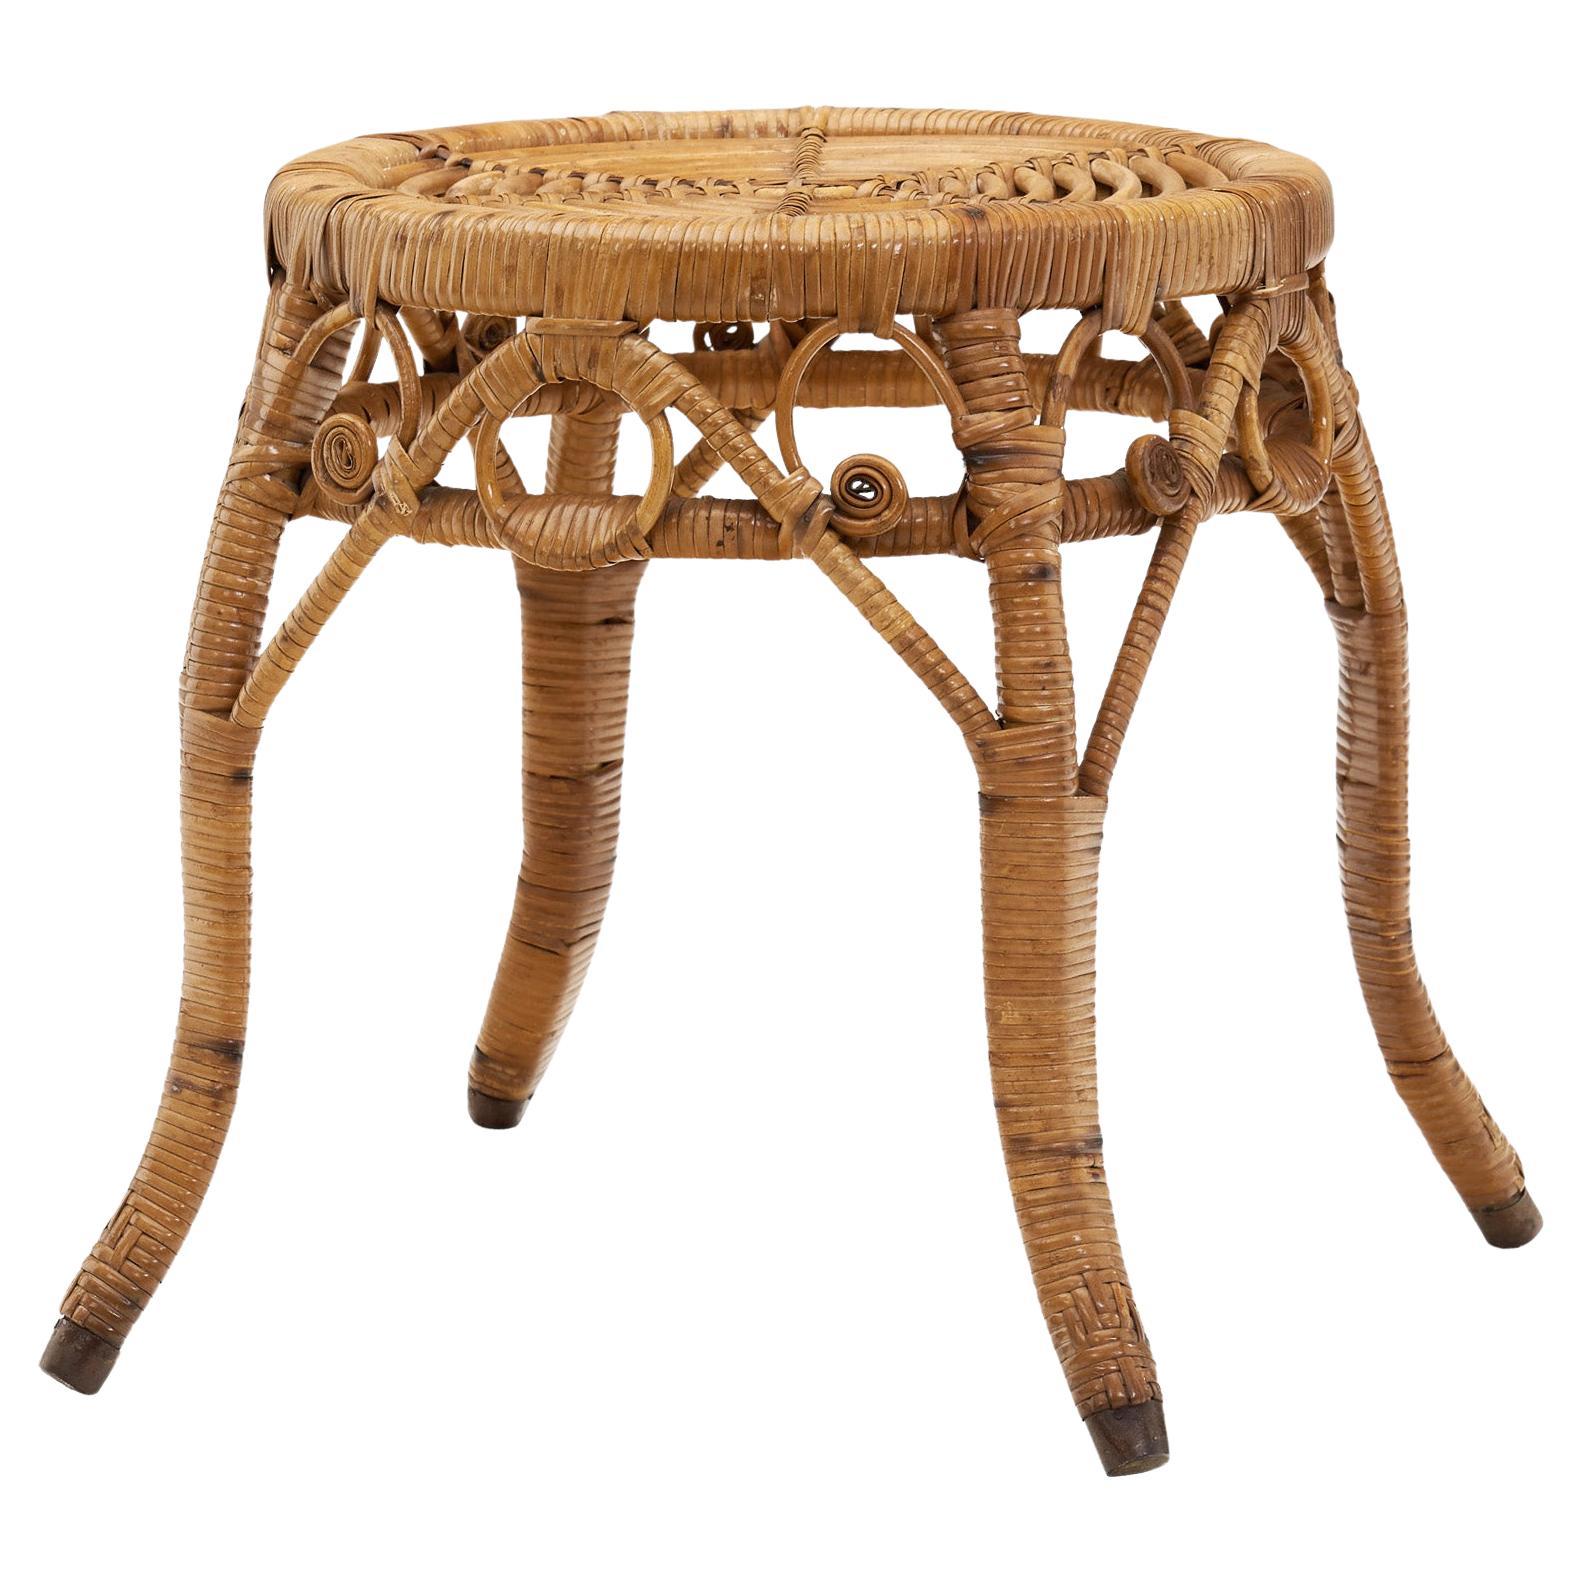 Woven Rattan Stool, Europe Early 20th Century